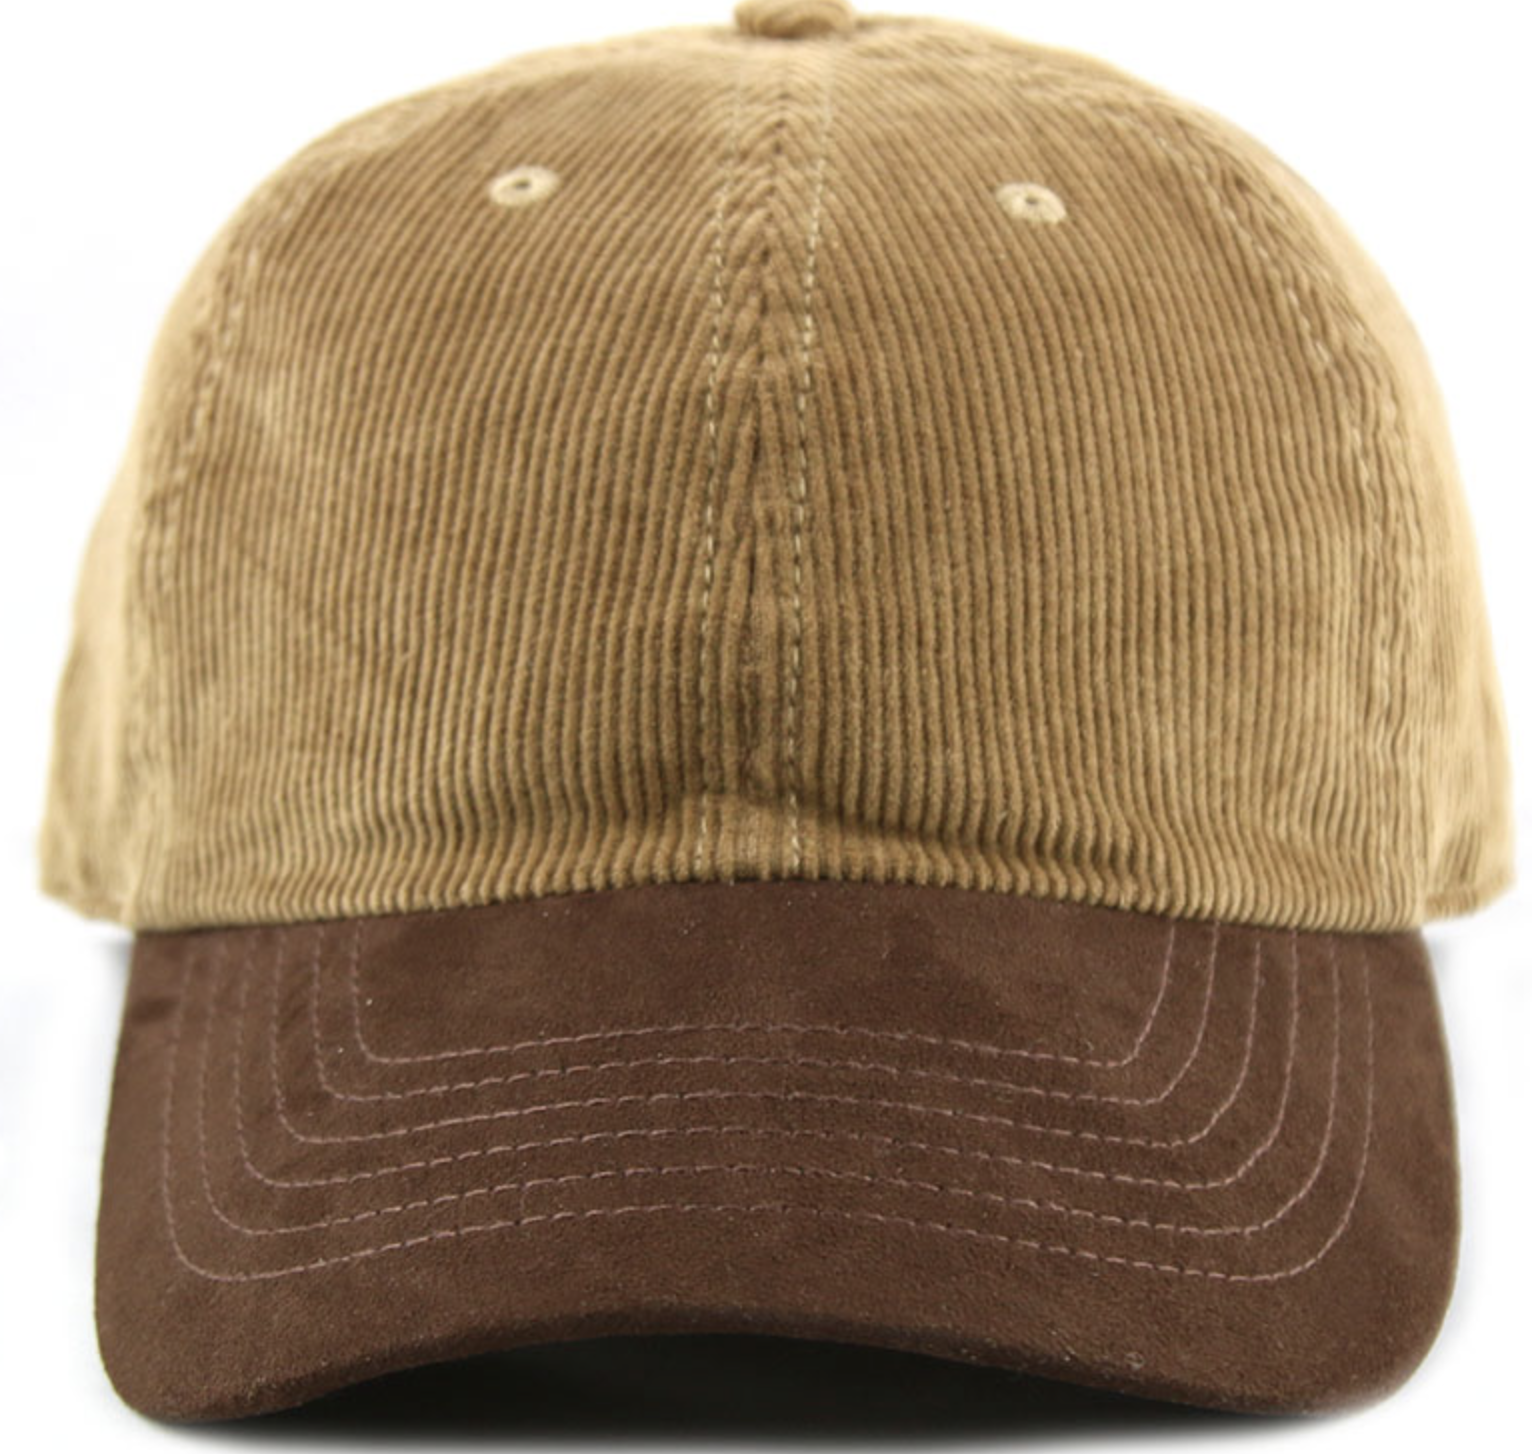 Cotton Corduroy Cap with Synthetic Suede Visor 1469